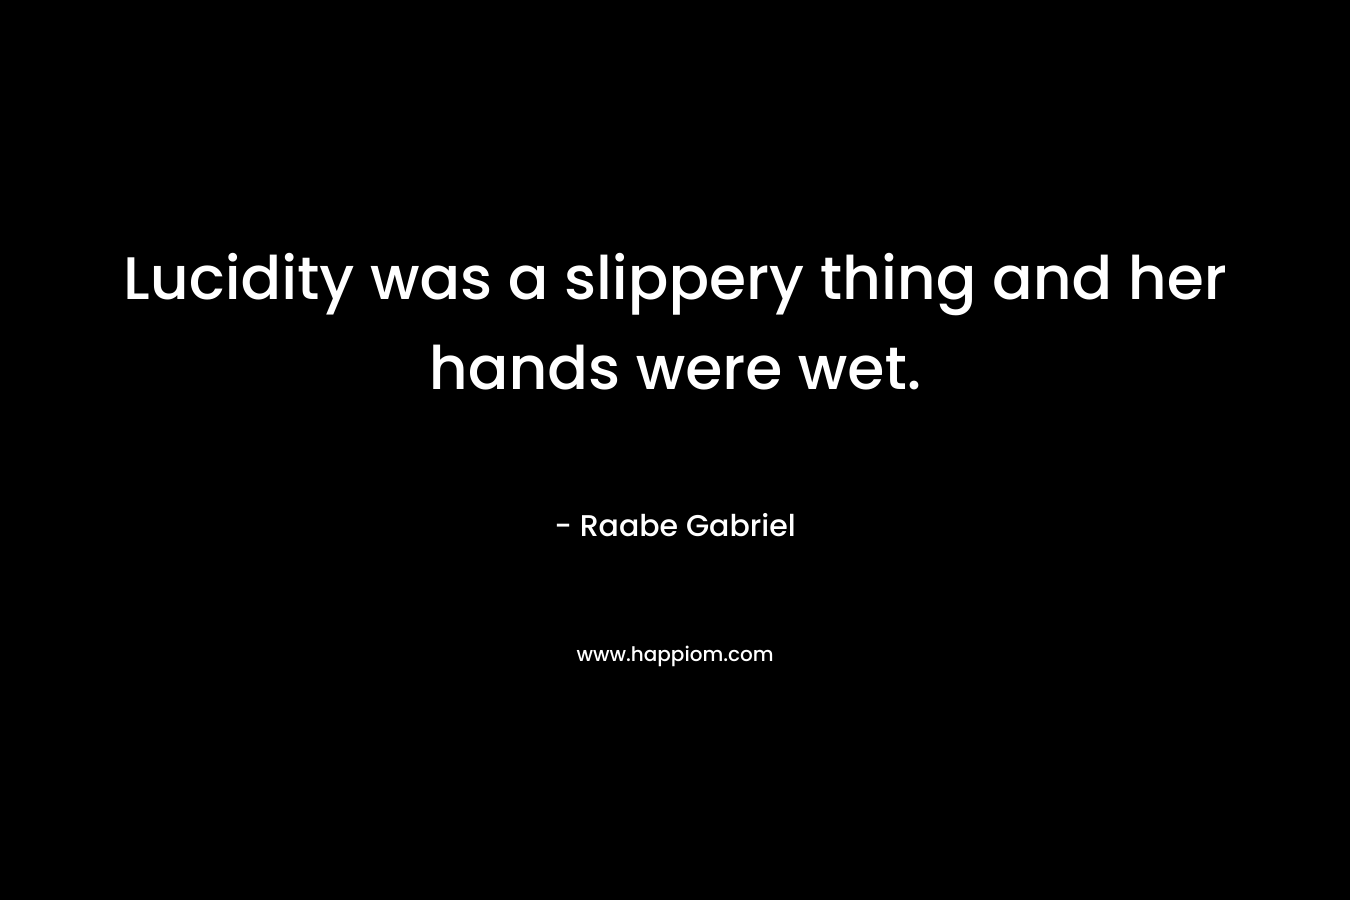 Lucidity was a slippery thing and her hands were wet. – Raabe Gabriel